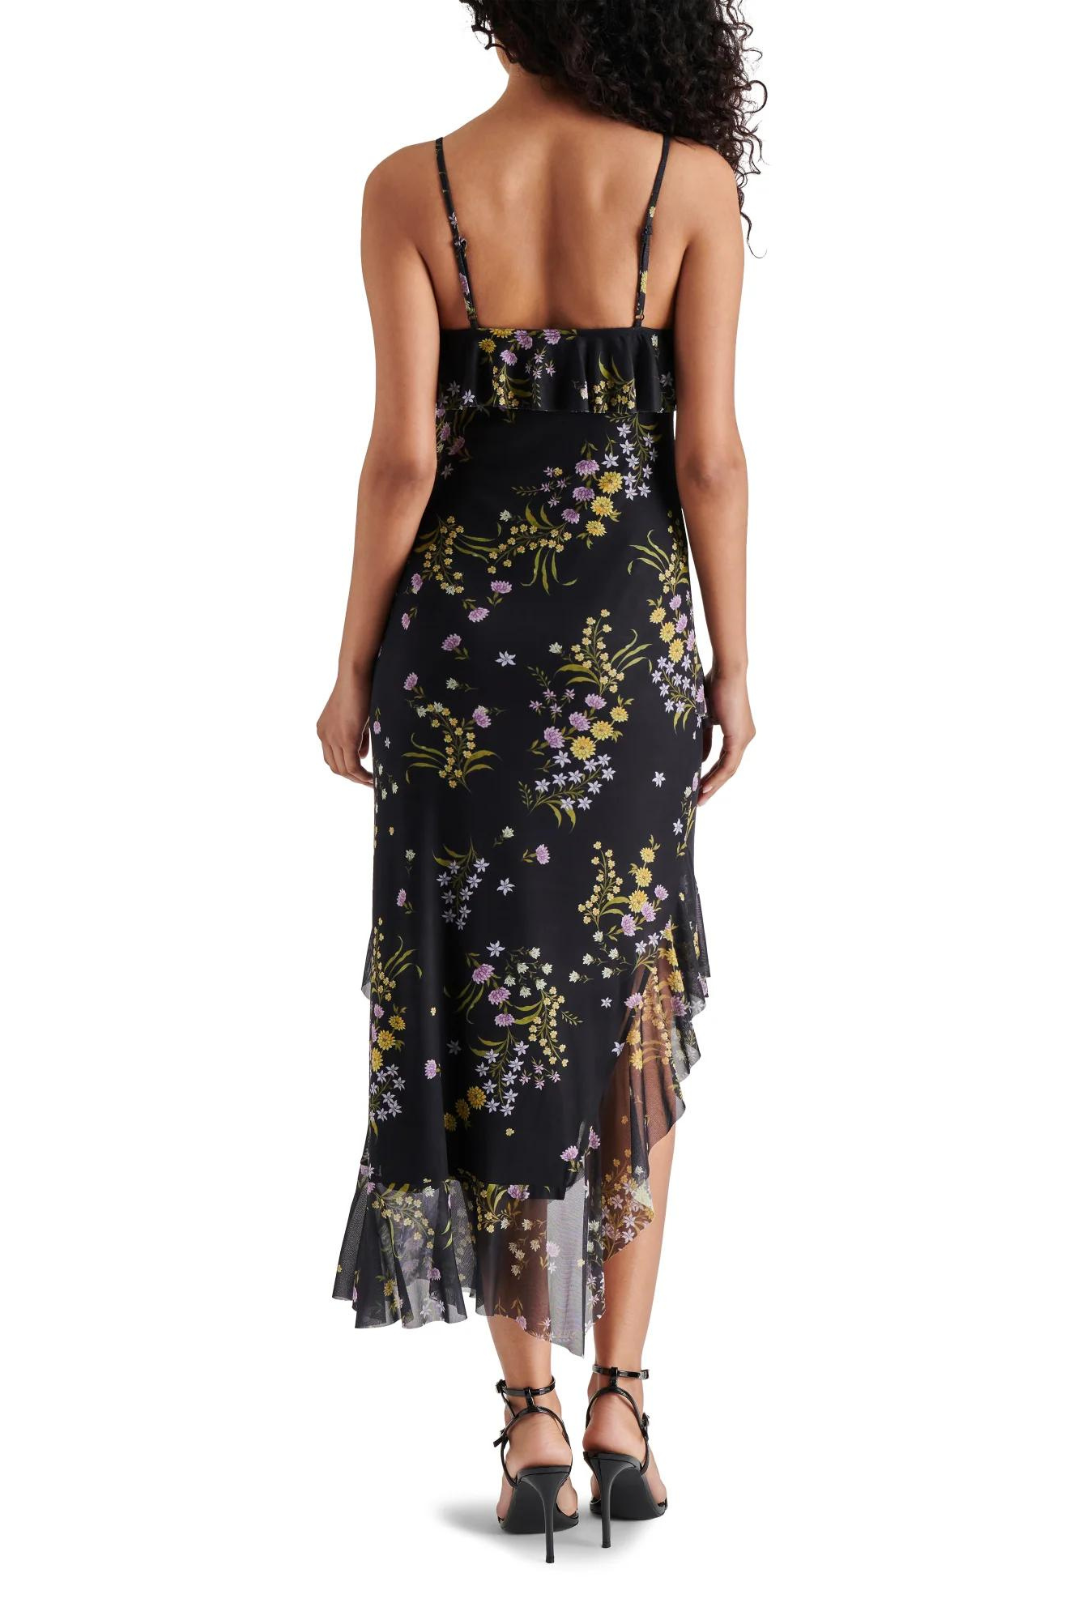 Steve Madden Aida Dress. The Steve Madden Aida Dress is a gorgeous noodle-strap dress with an asymmetrical hem and tired detailing on the entire dress! The fabric is a black base with a purple and yellow floral design. Pair this dress with boots or heels for a gorgeous look!